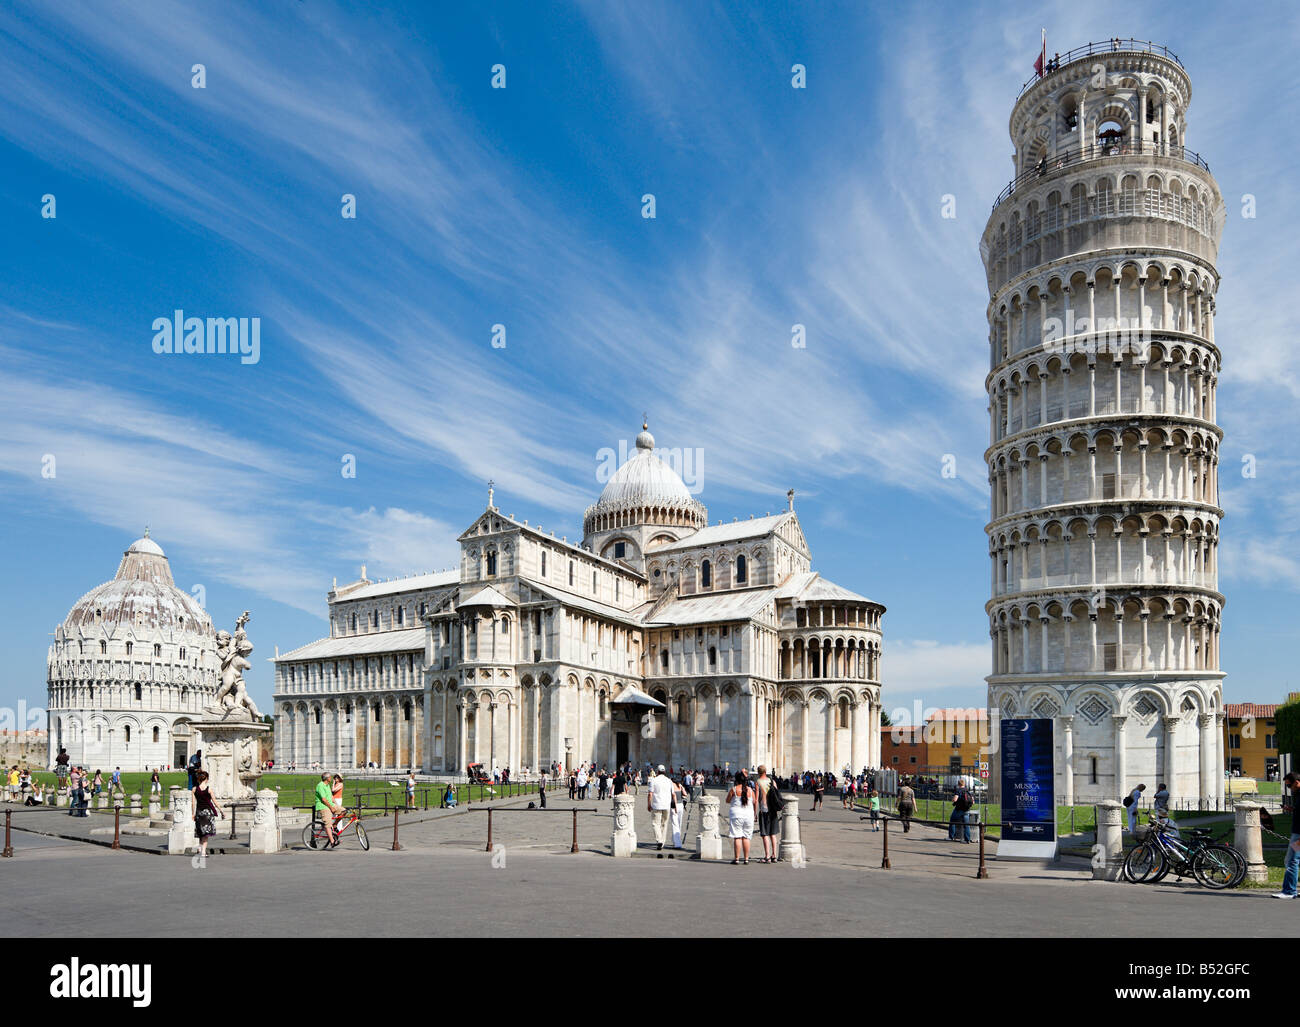 The Baptistry, Duomo and Leaning Tower, Piazza dei Miracoli, Pisa, Tuscany, Italy Stock Photo